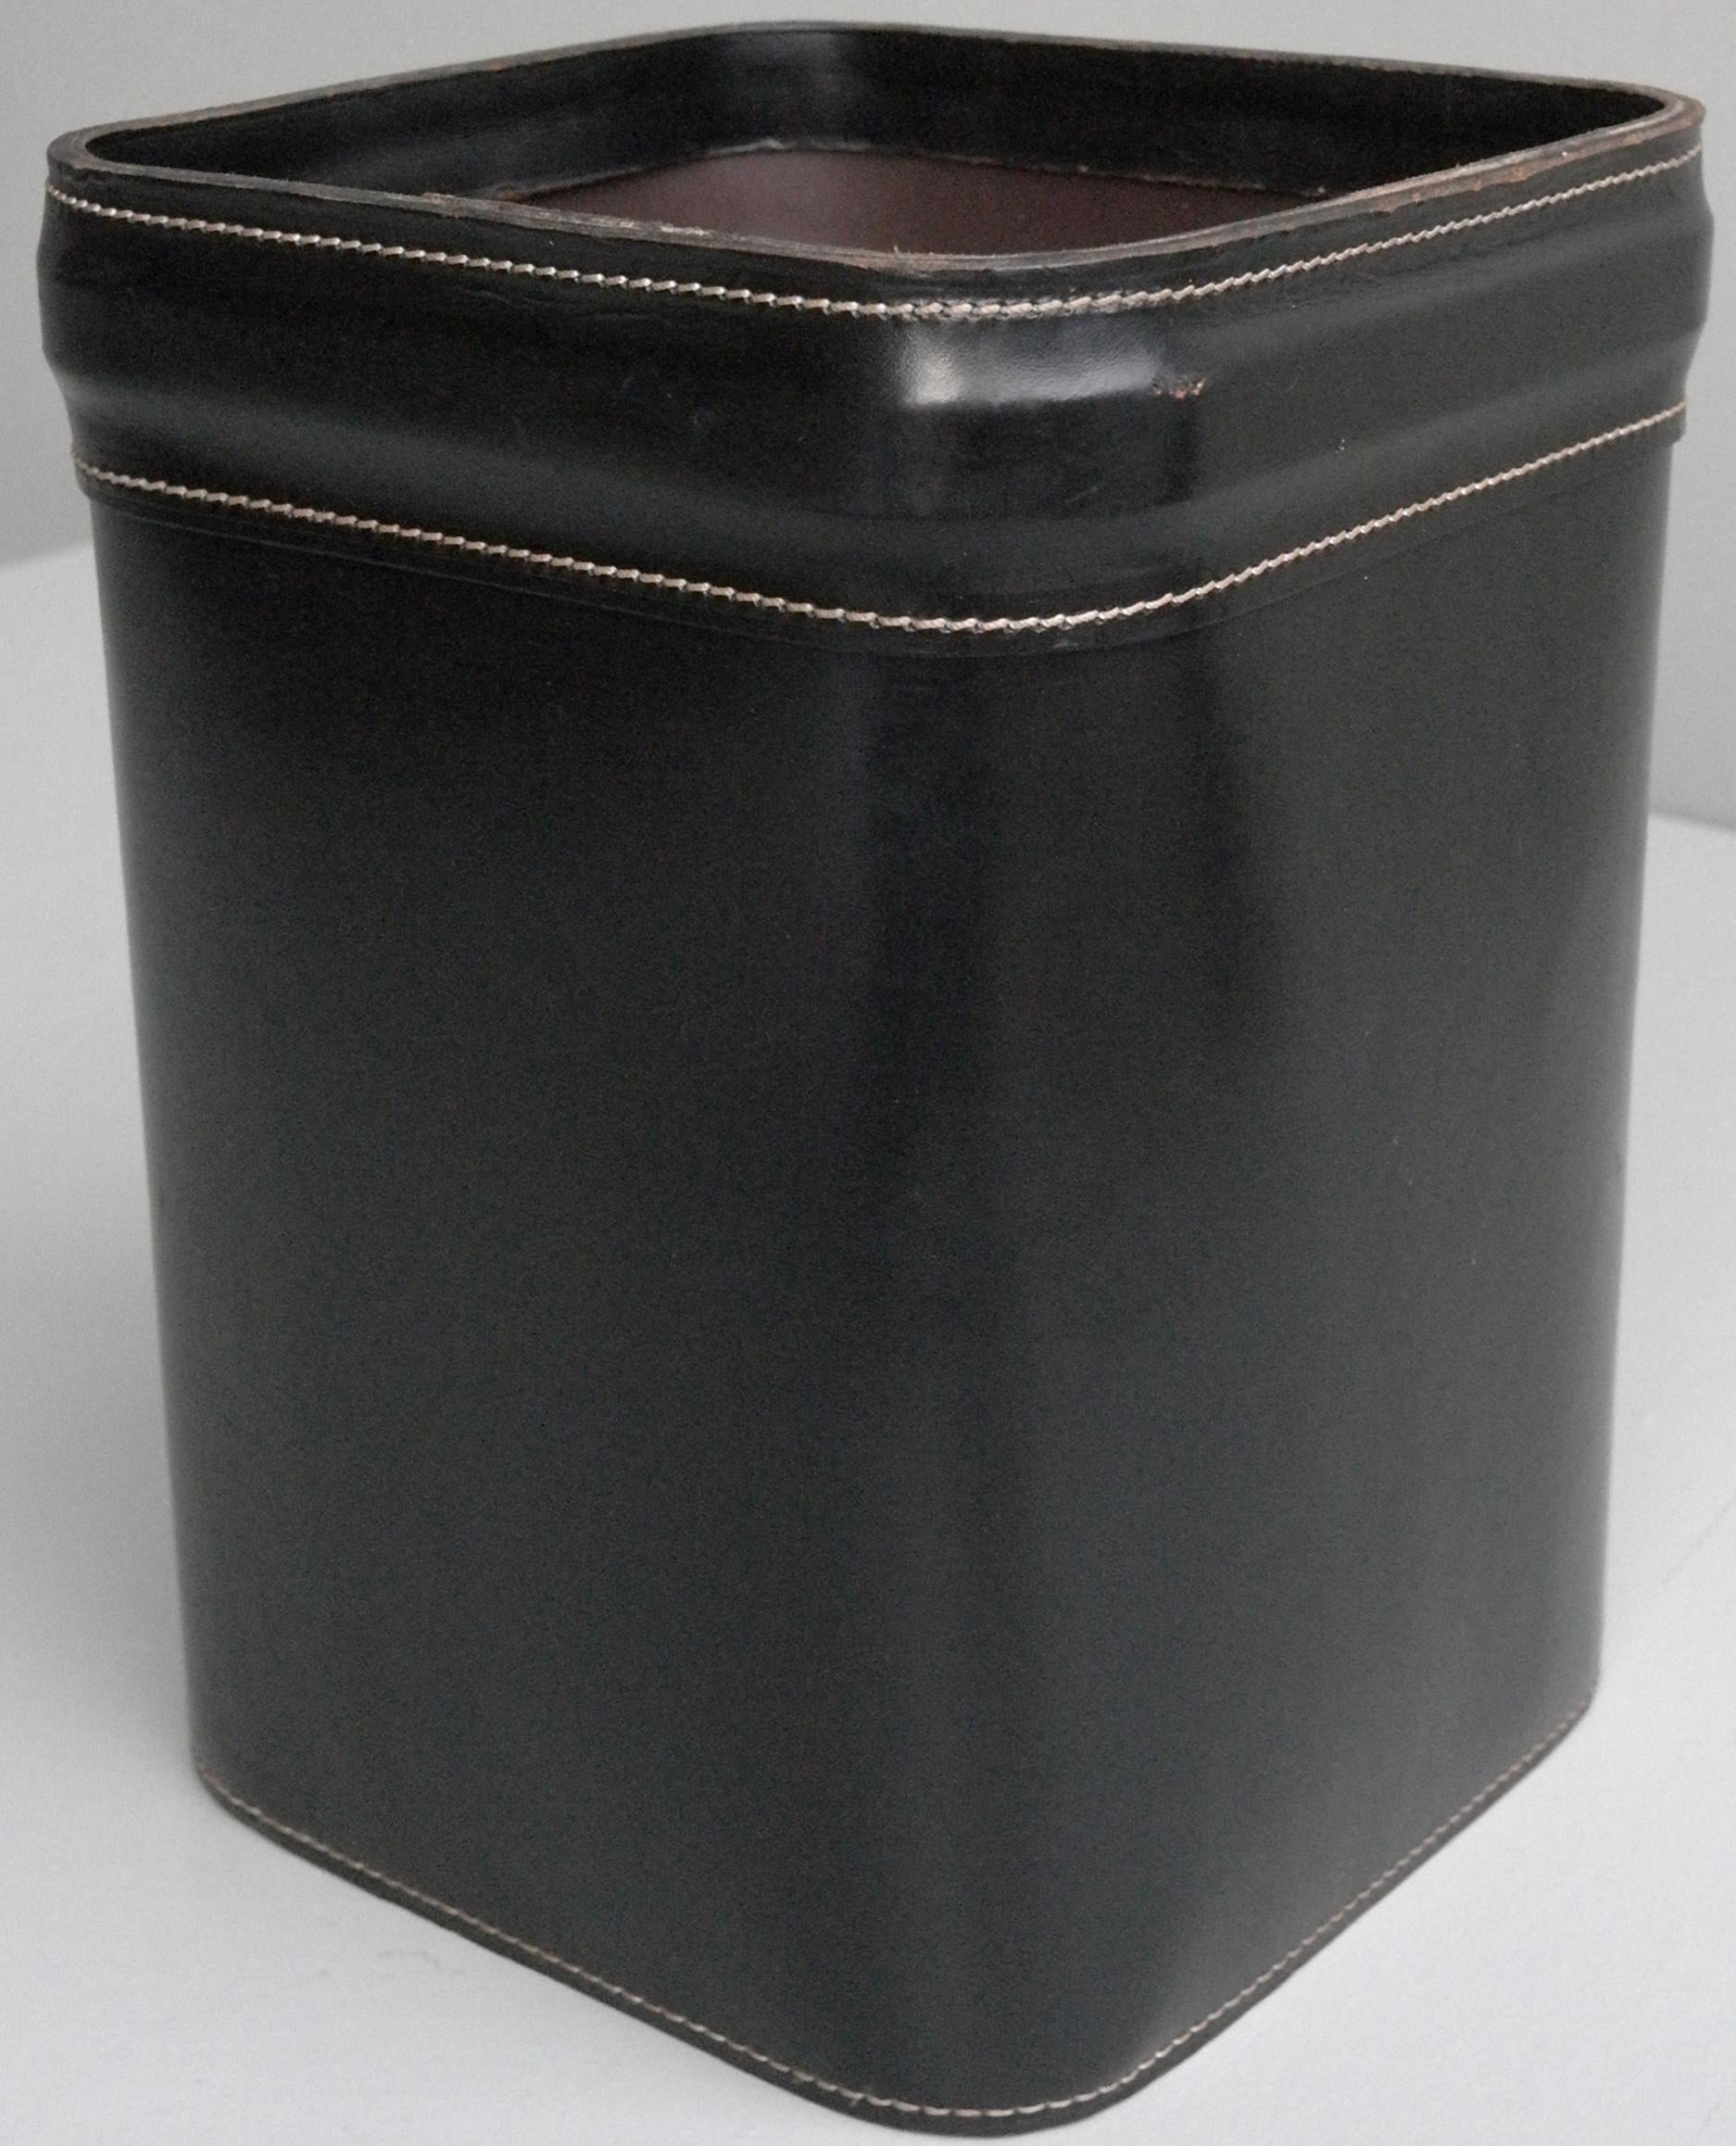 Mid-Century Modern French Hand Stitched Black Leather Waste Paper Basket